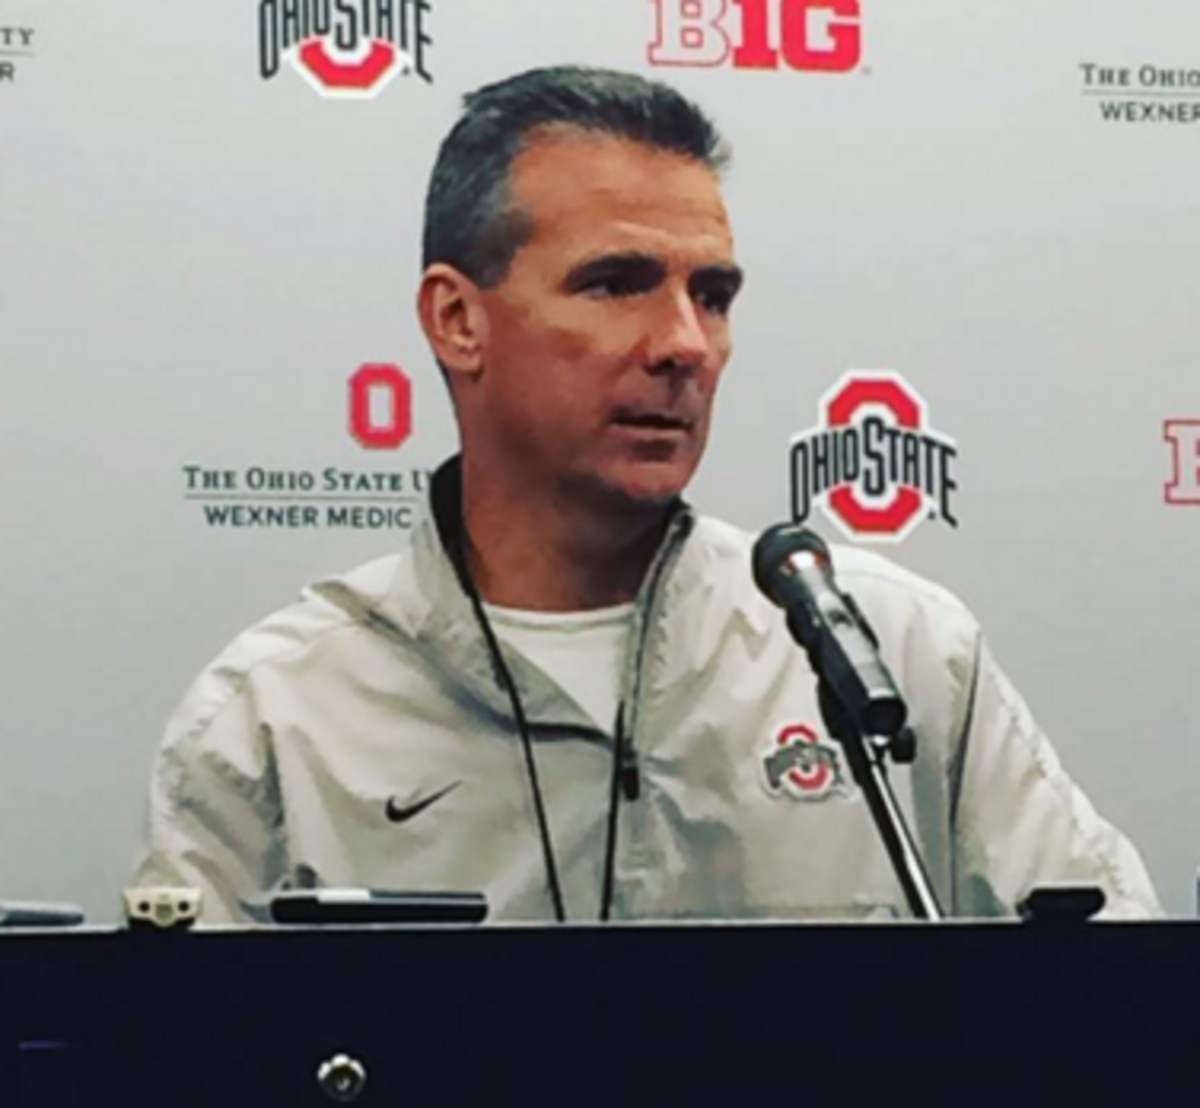 Urban Meyer talks about JT Barrett during a press conference.